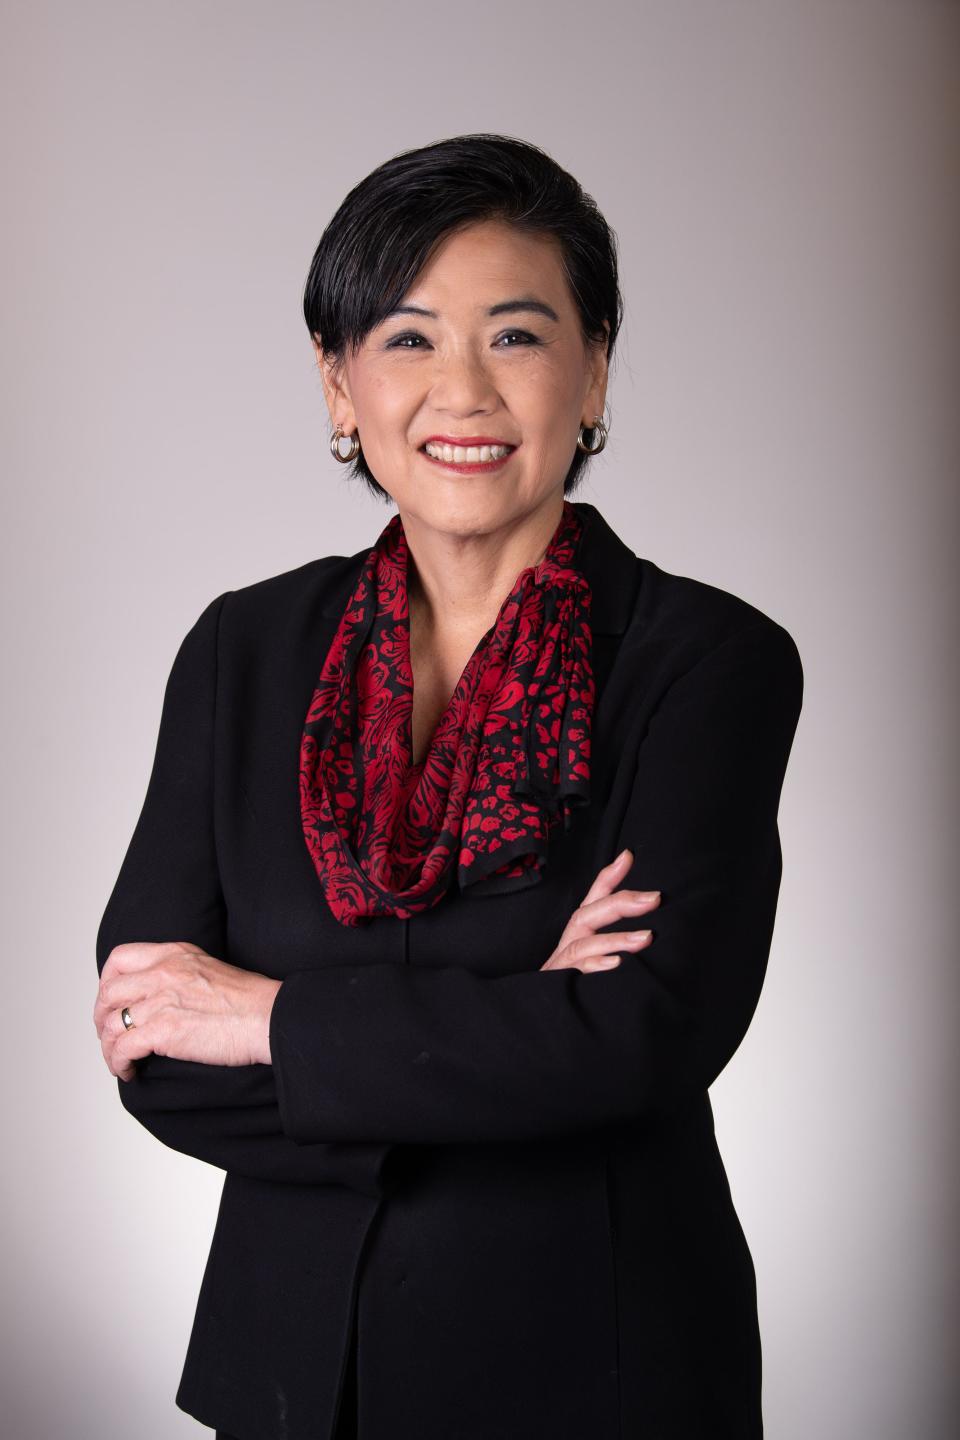 U.S. Rep. Judy Chu, a California Democrat and chair of the Congressional Asian Pacific American Caucus, has spoken out against federal and state laws that would ban land ownership because of a person's nationality.